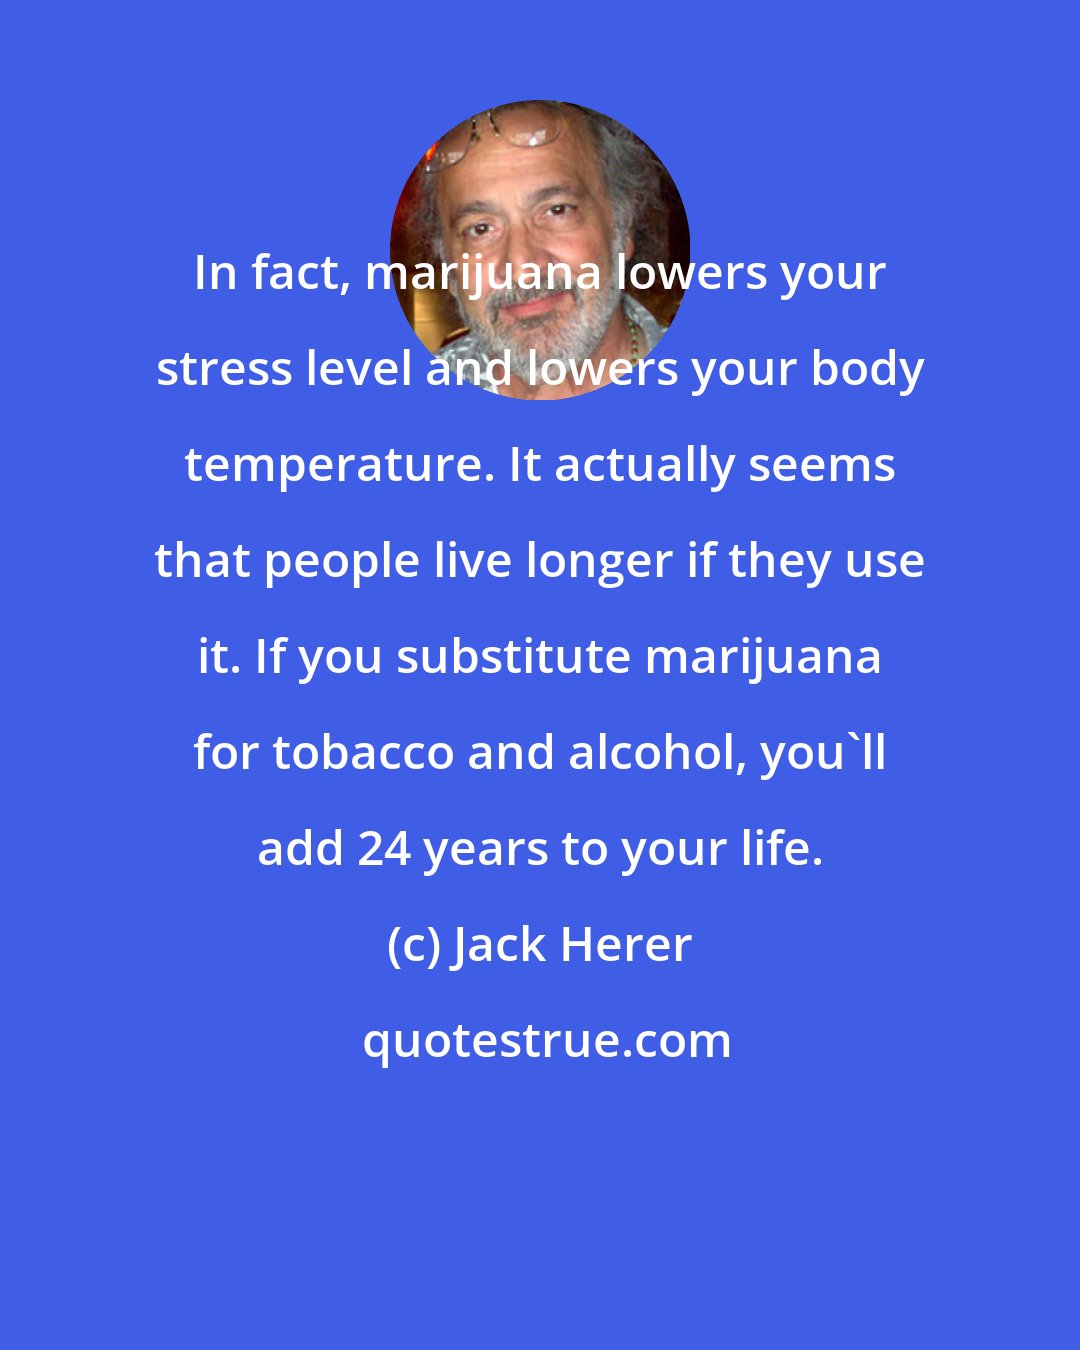 Jack Herer: In fact, marijuana lowers your stress level and lowers your body temperature. It actually seems that people live longer if they use it. If you substitute marijuana for tobacco and alcohol, you'll add 24 years to your life.